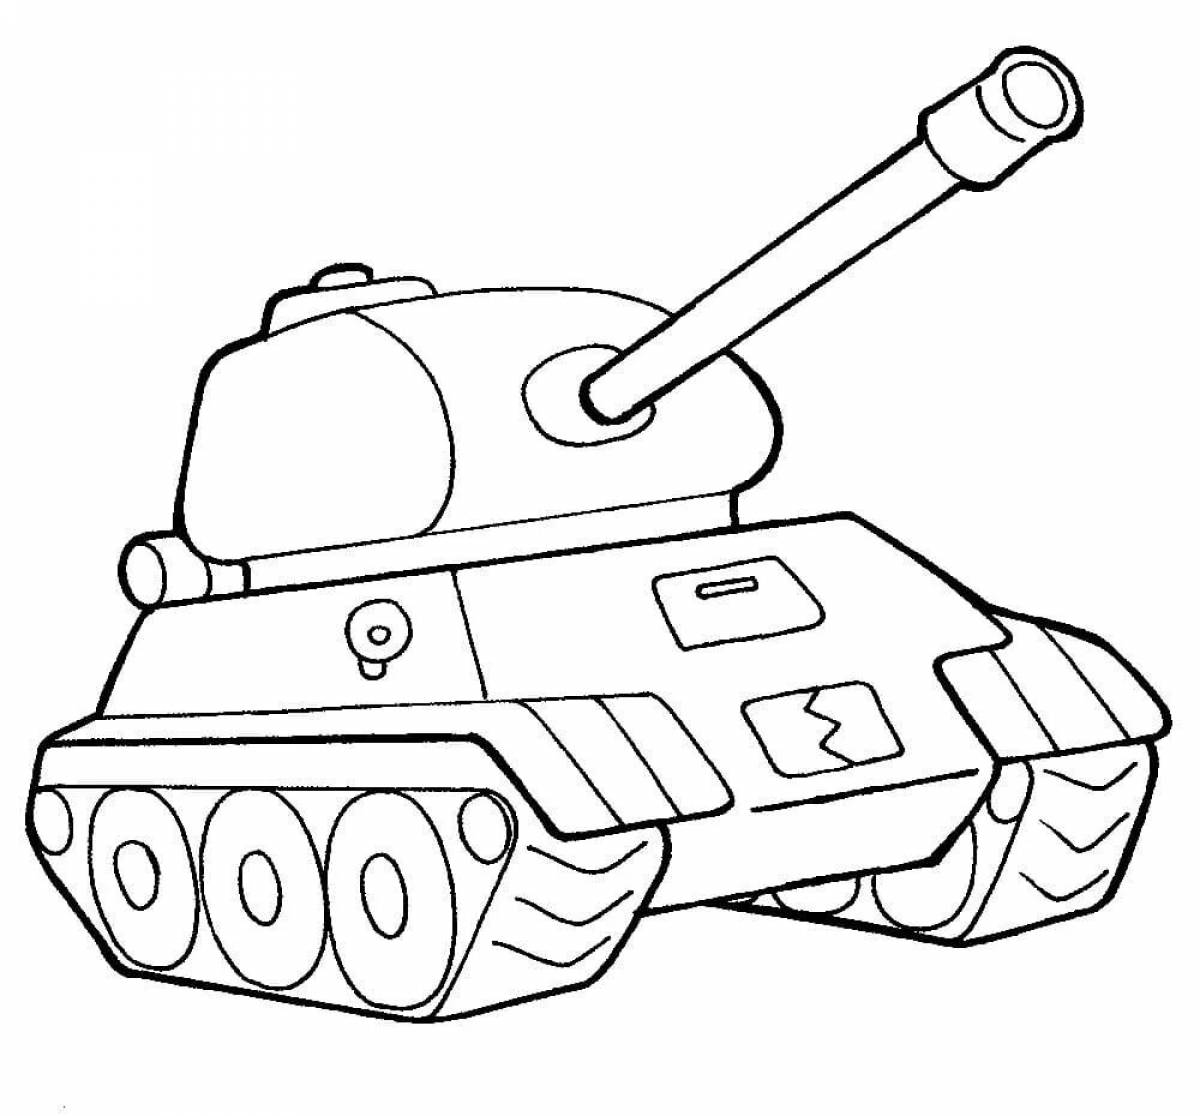 Creative tank coloring pages for 4-5 year olds